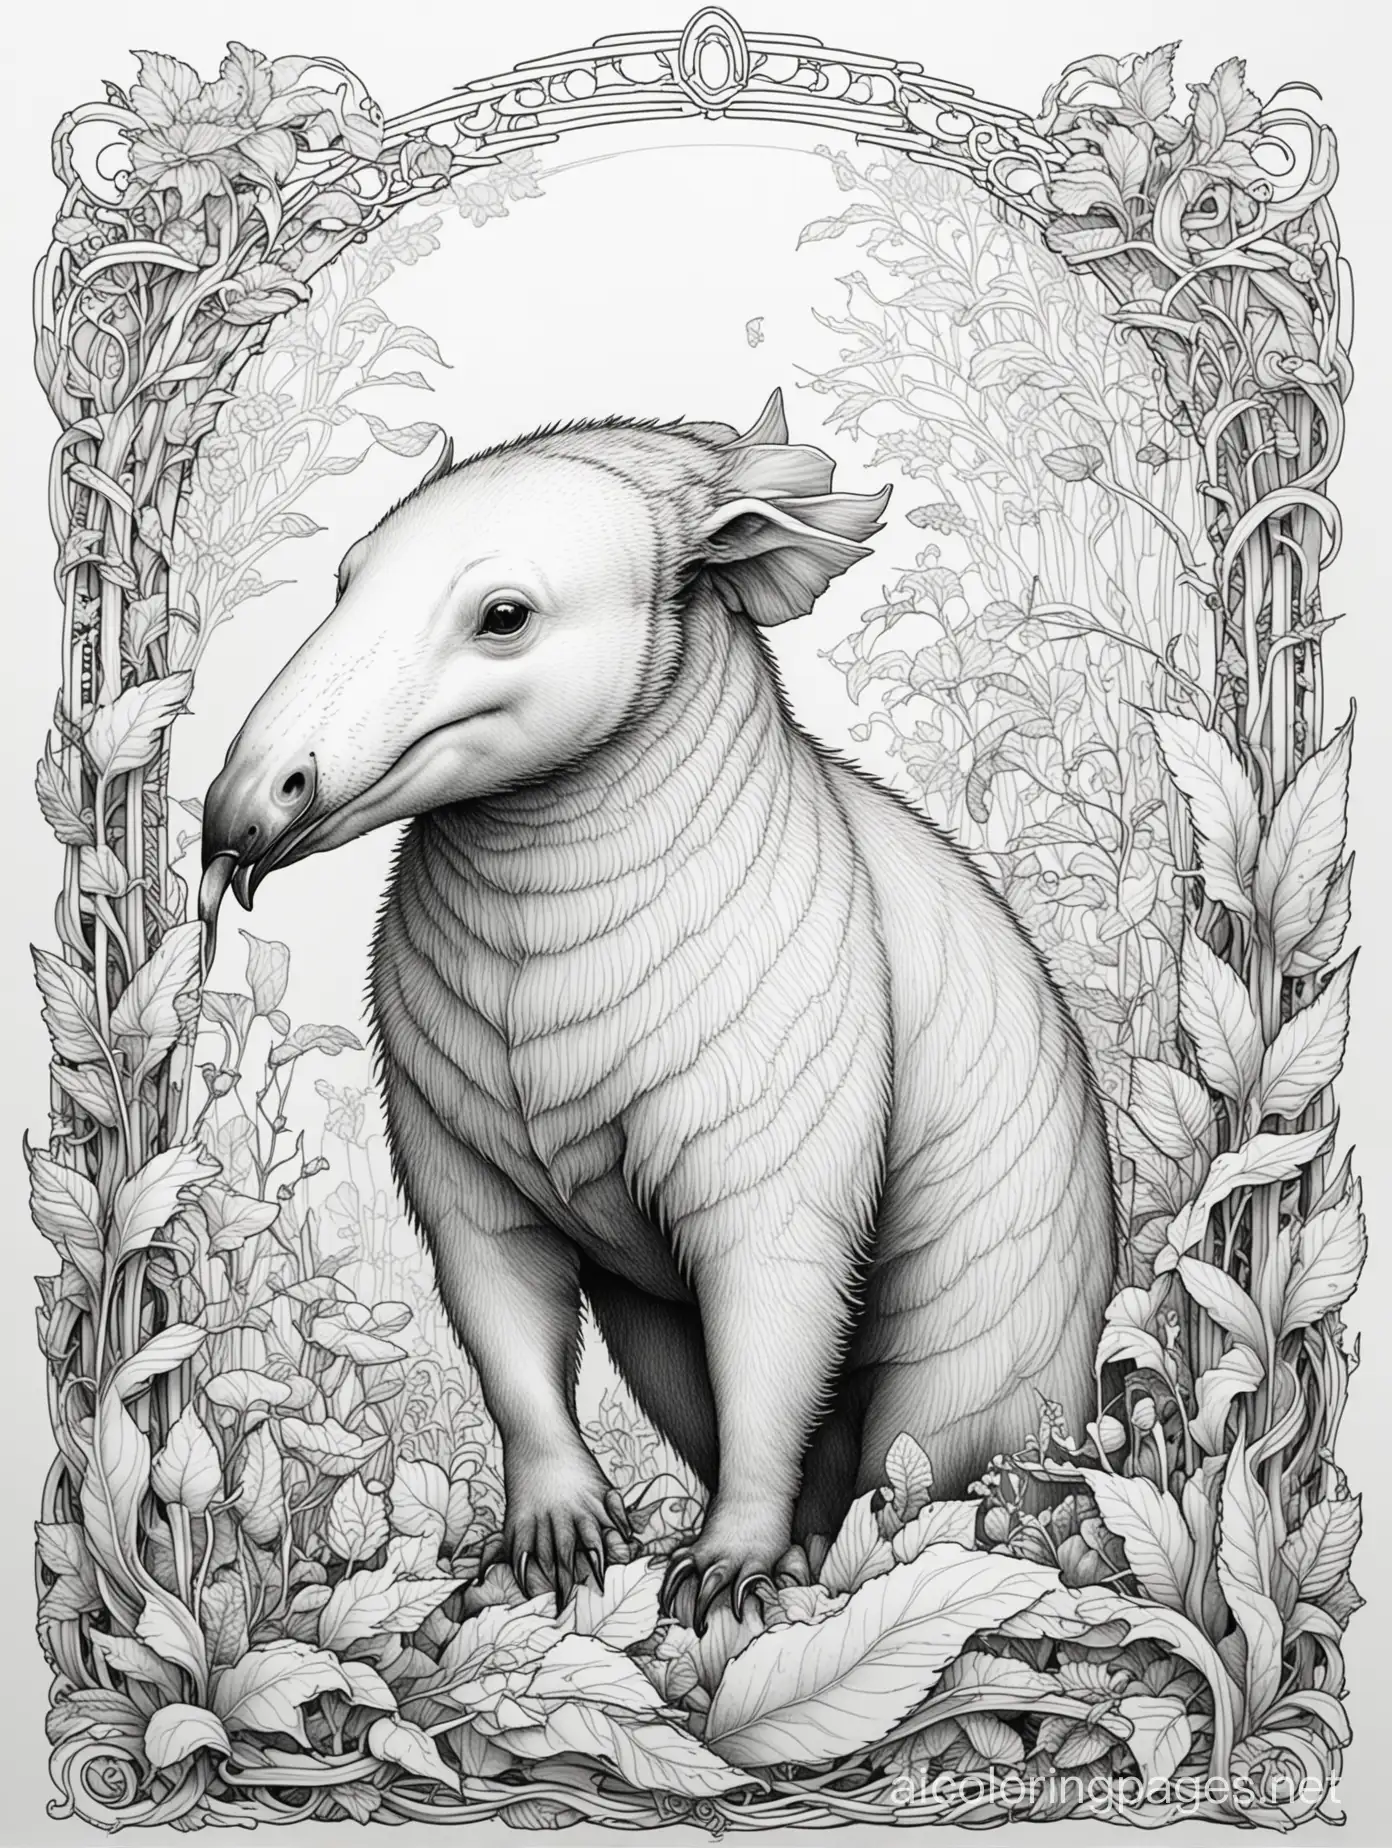 Graphic illustration Anteater, fantasy, ethereal, beautiful, Art nouveau,  in the style of James Jean, Coloring Page, black and white, line art, white background, Simplicity, Ample White Space. The background of the coloring page is plain white to make it easy for young children to color within the lines. The outlines of all the subjects are easy to distinguish, making it simple for kids to color without too much difficulty